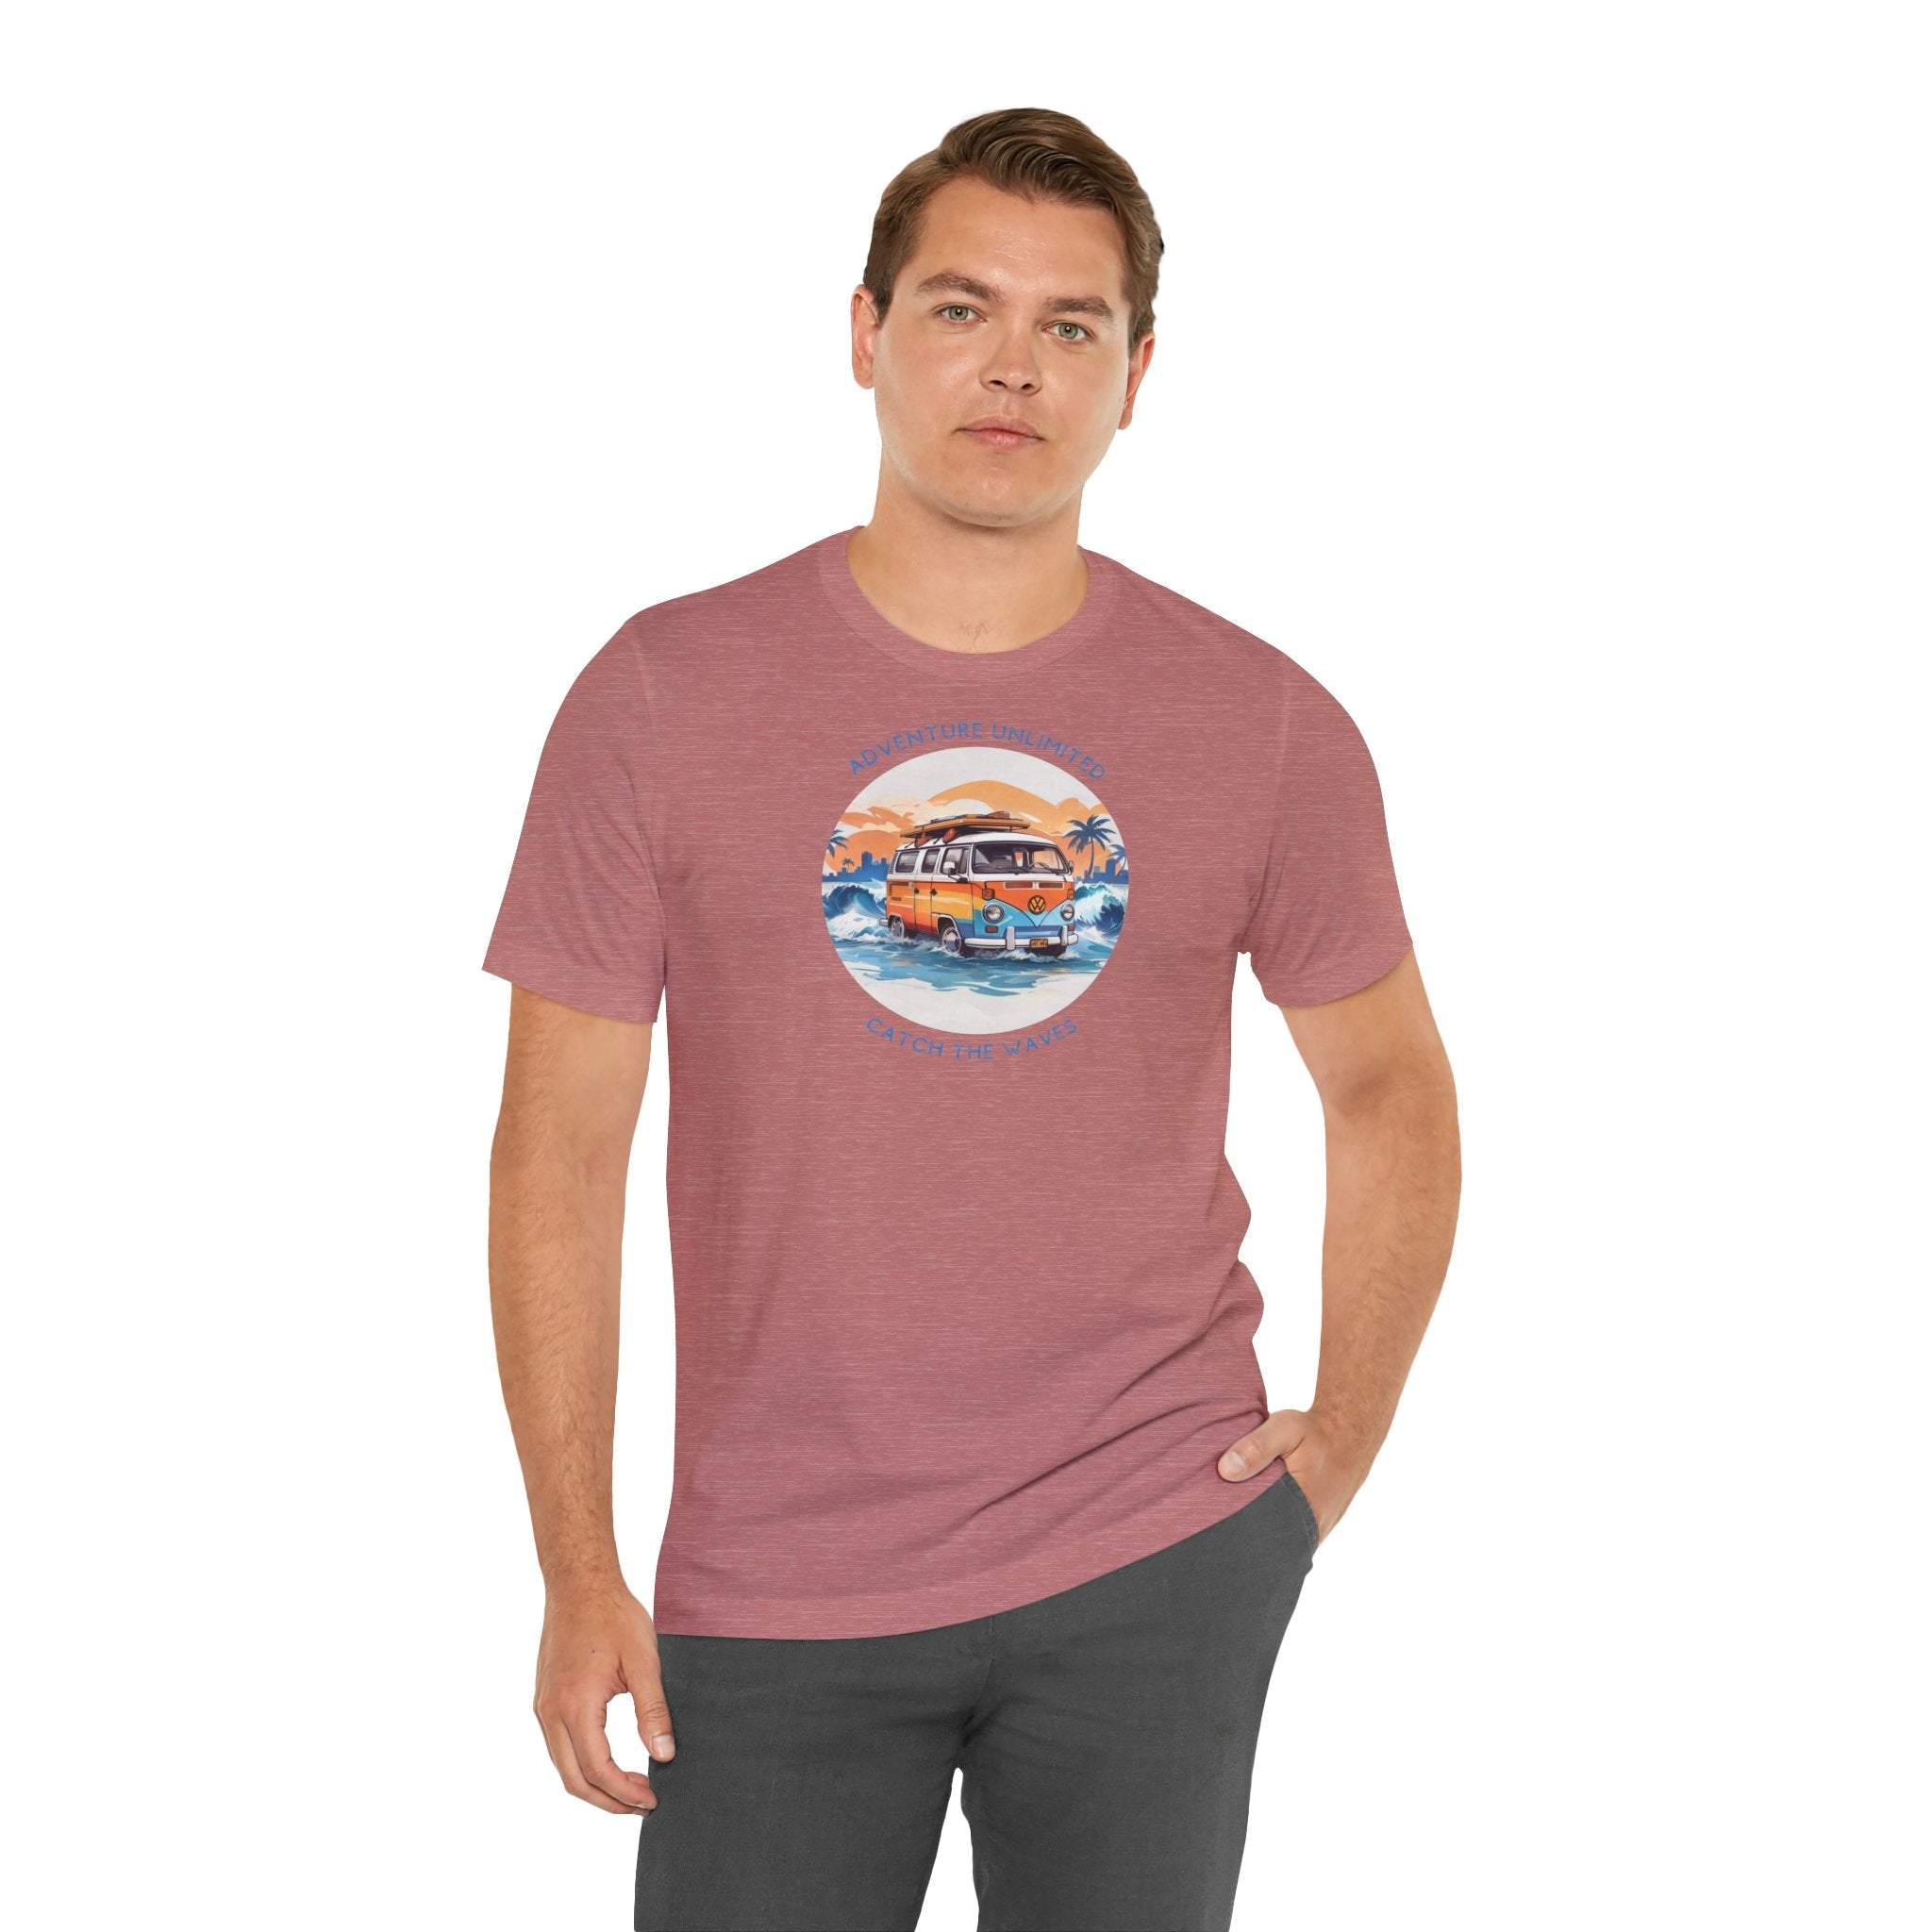 Man in maroon surfboard-printed tee with sunset background - Adventure Unlimited Direct-to-Garment Printed T-Shirt